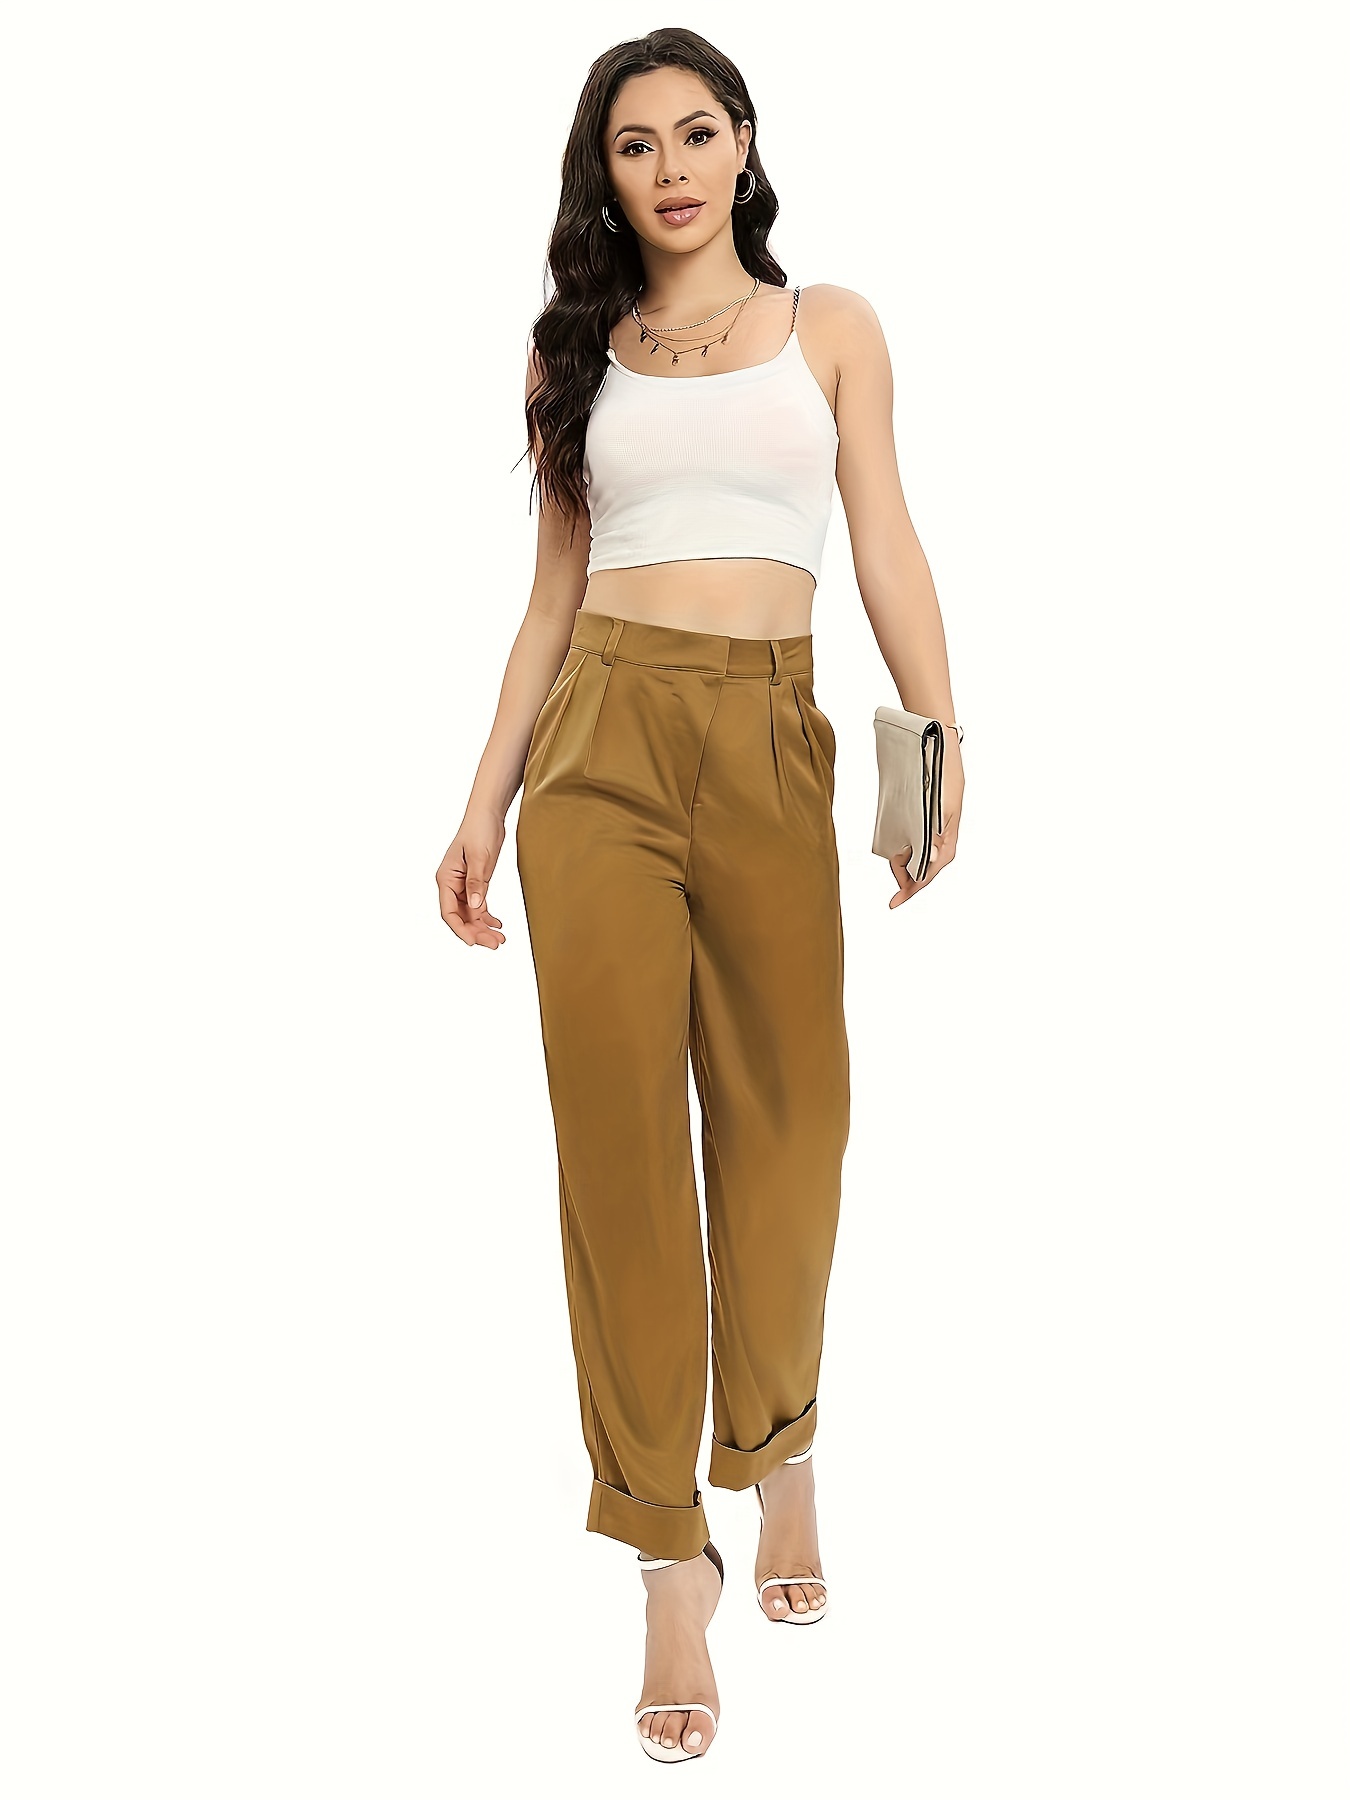 Business Casual Pants for Women Size 14 Stretch High Pants Women Trousers  Sexy Color Solid Leg Plaid Pants for Women Khaki at  Women's Clothing  store